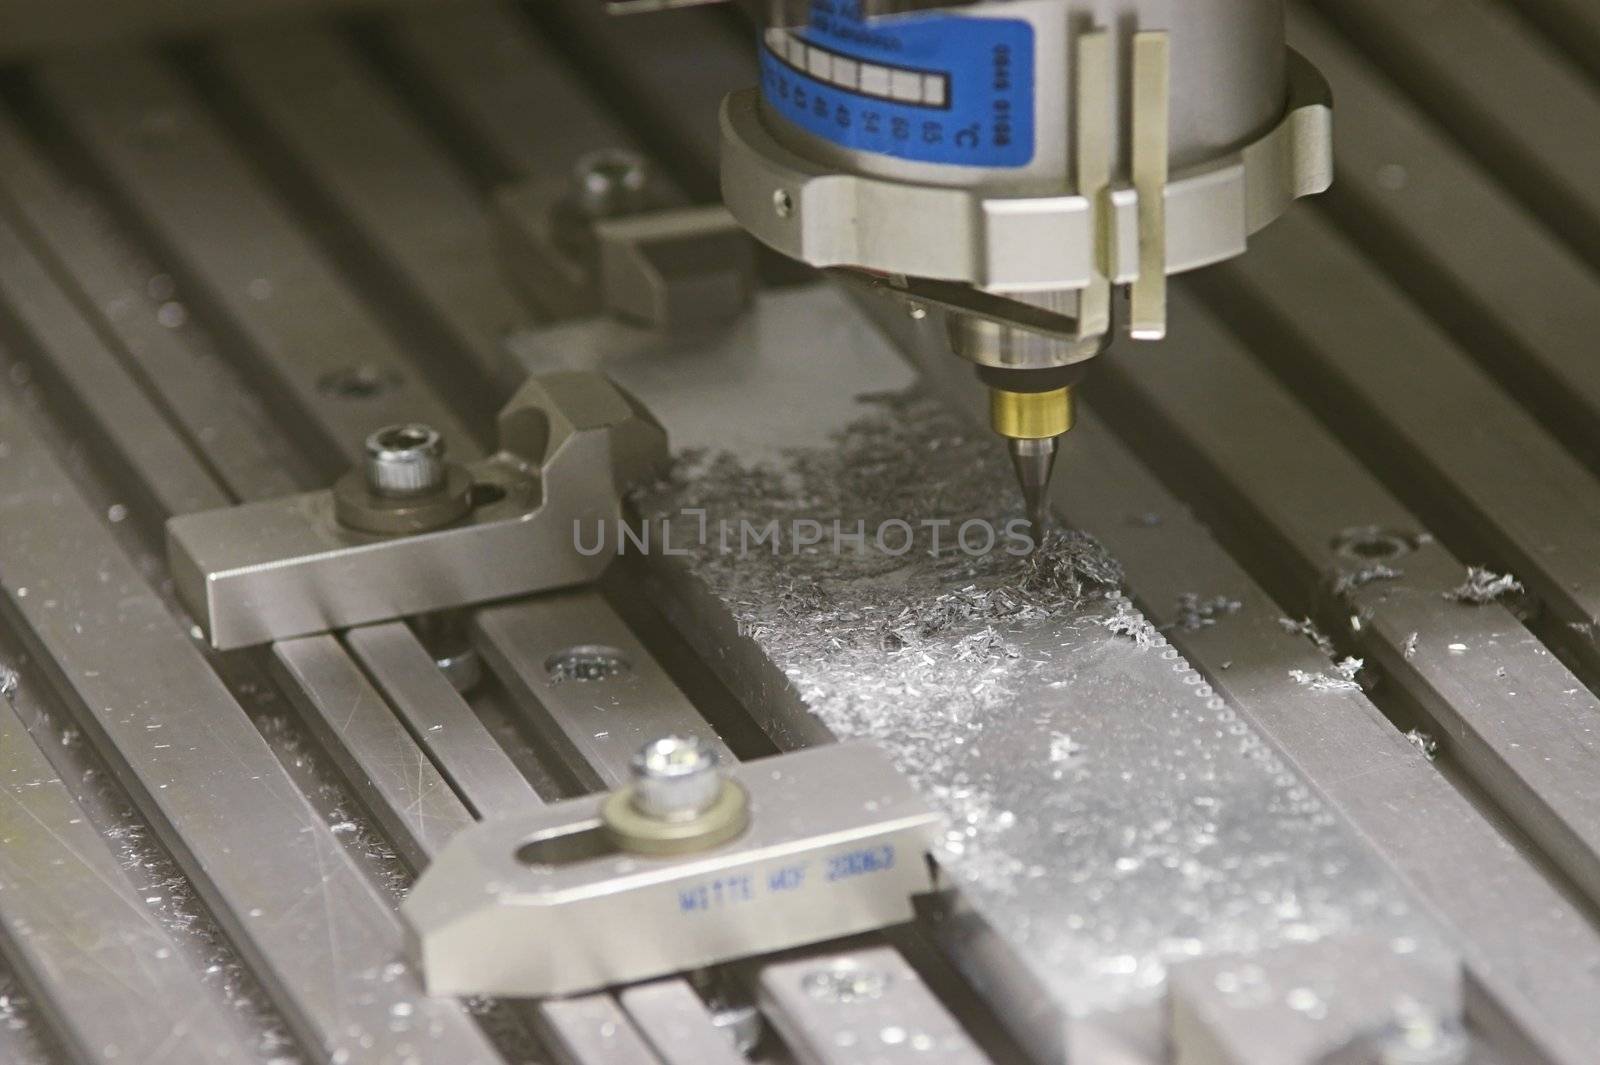 Drilling Machine automatically processing a metallic part.